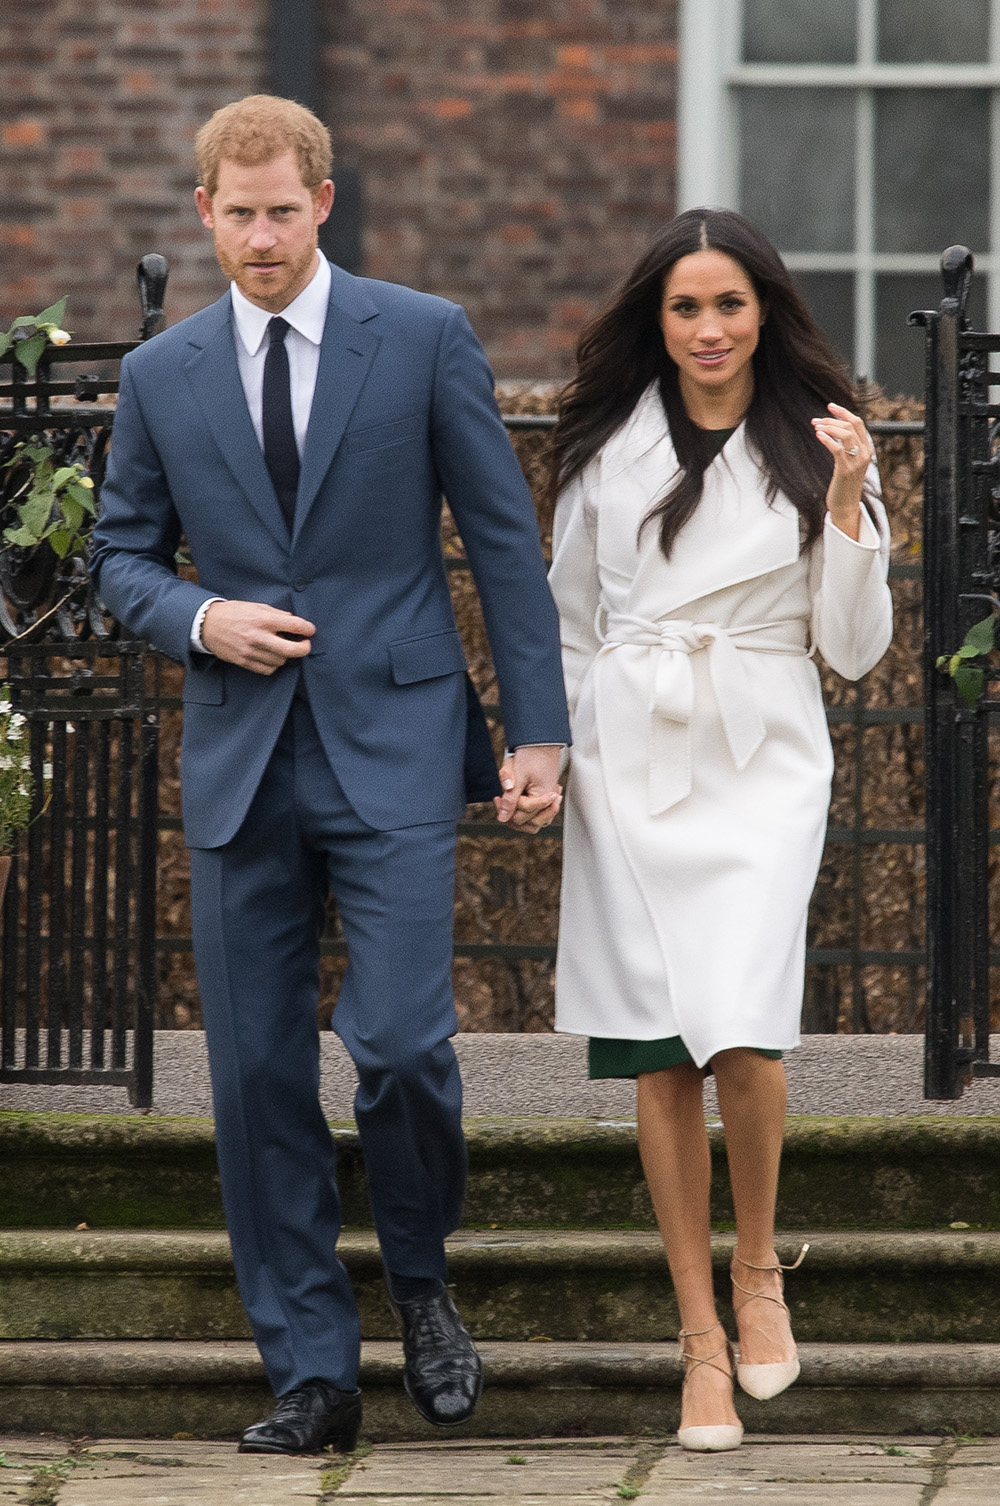 November 27, 2017: During an official photocall to announce her engagementto Prince Harry at The Sunken Gardens at Kensington Palace, Meghan wearsa white wrap coat by Canadian brand Line The Label over an emarld coloured dress with her trusty Aquazzura nude heels that wrap around her ankles.